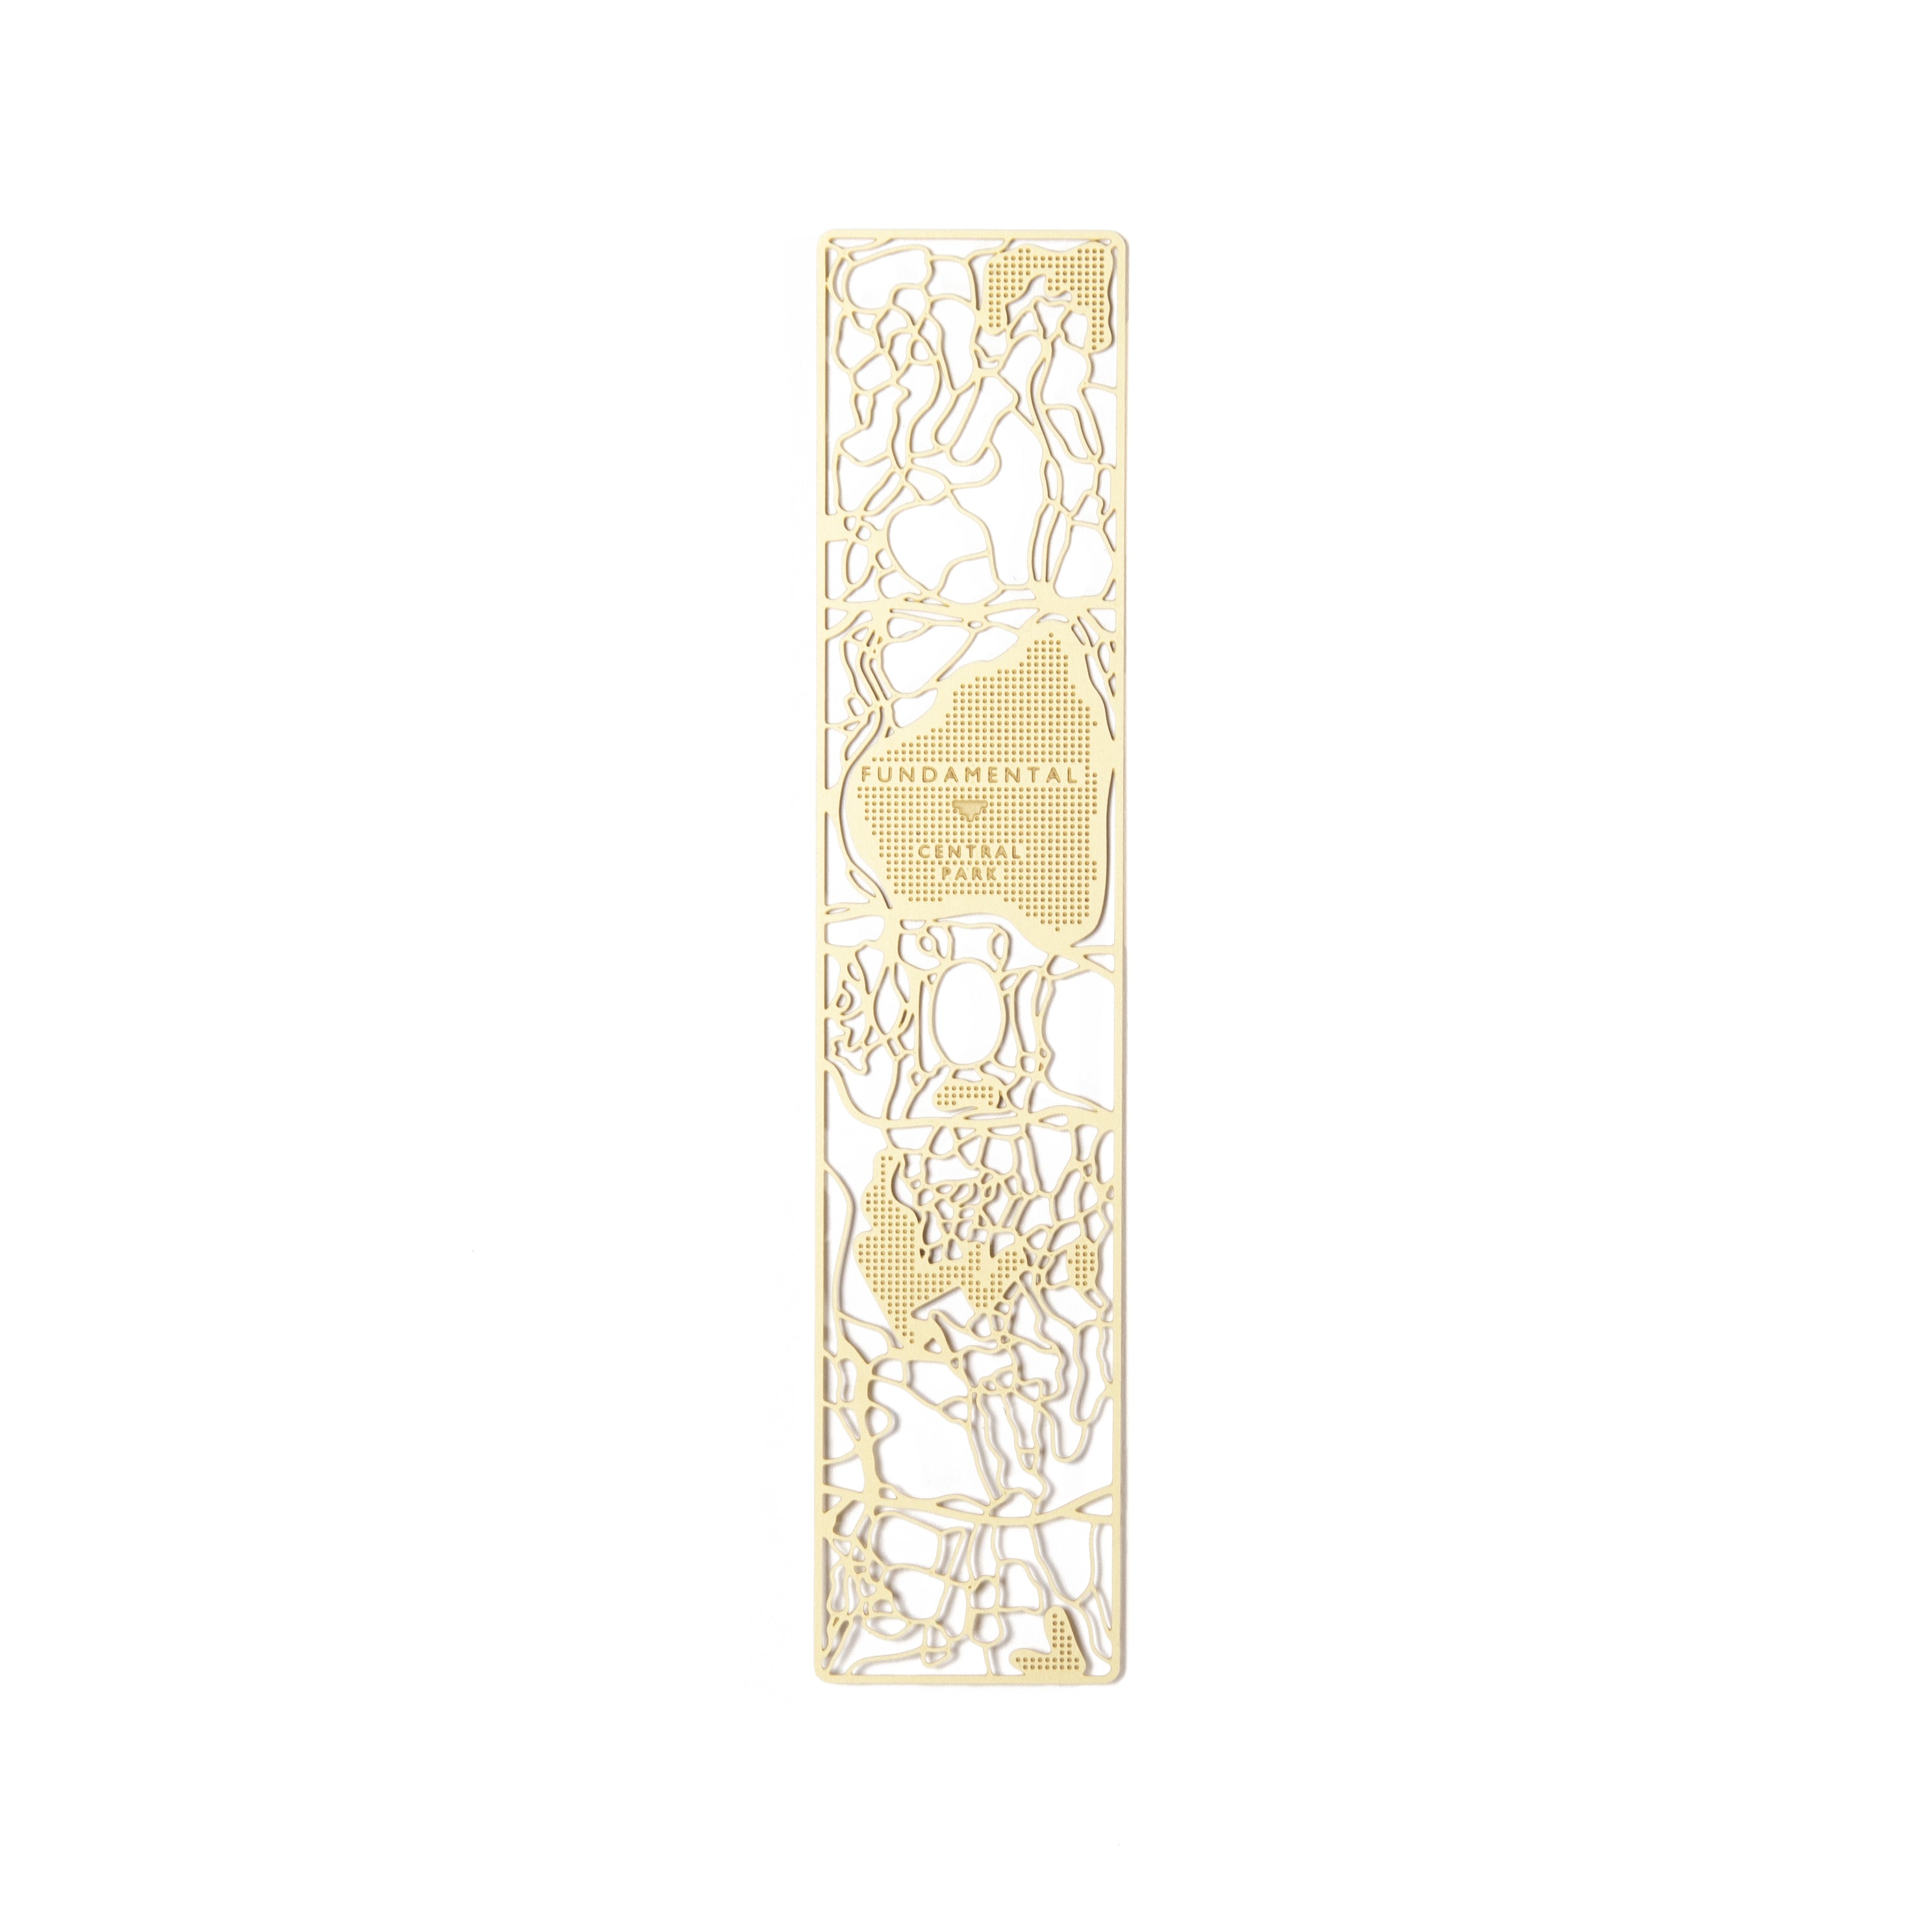 Elegant gold-tone Manhattan bookmark with intricate cut-out patterns